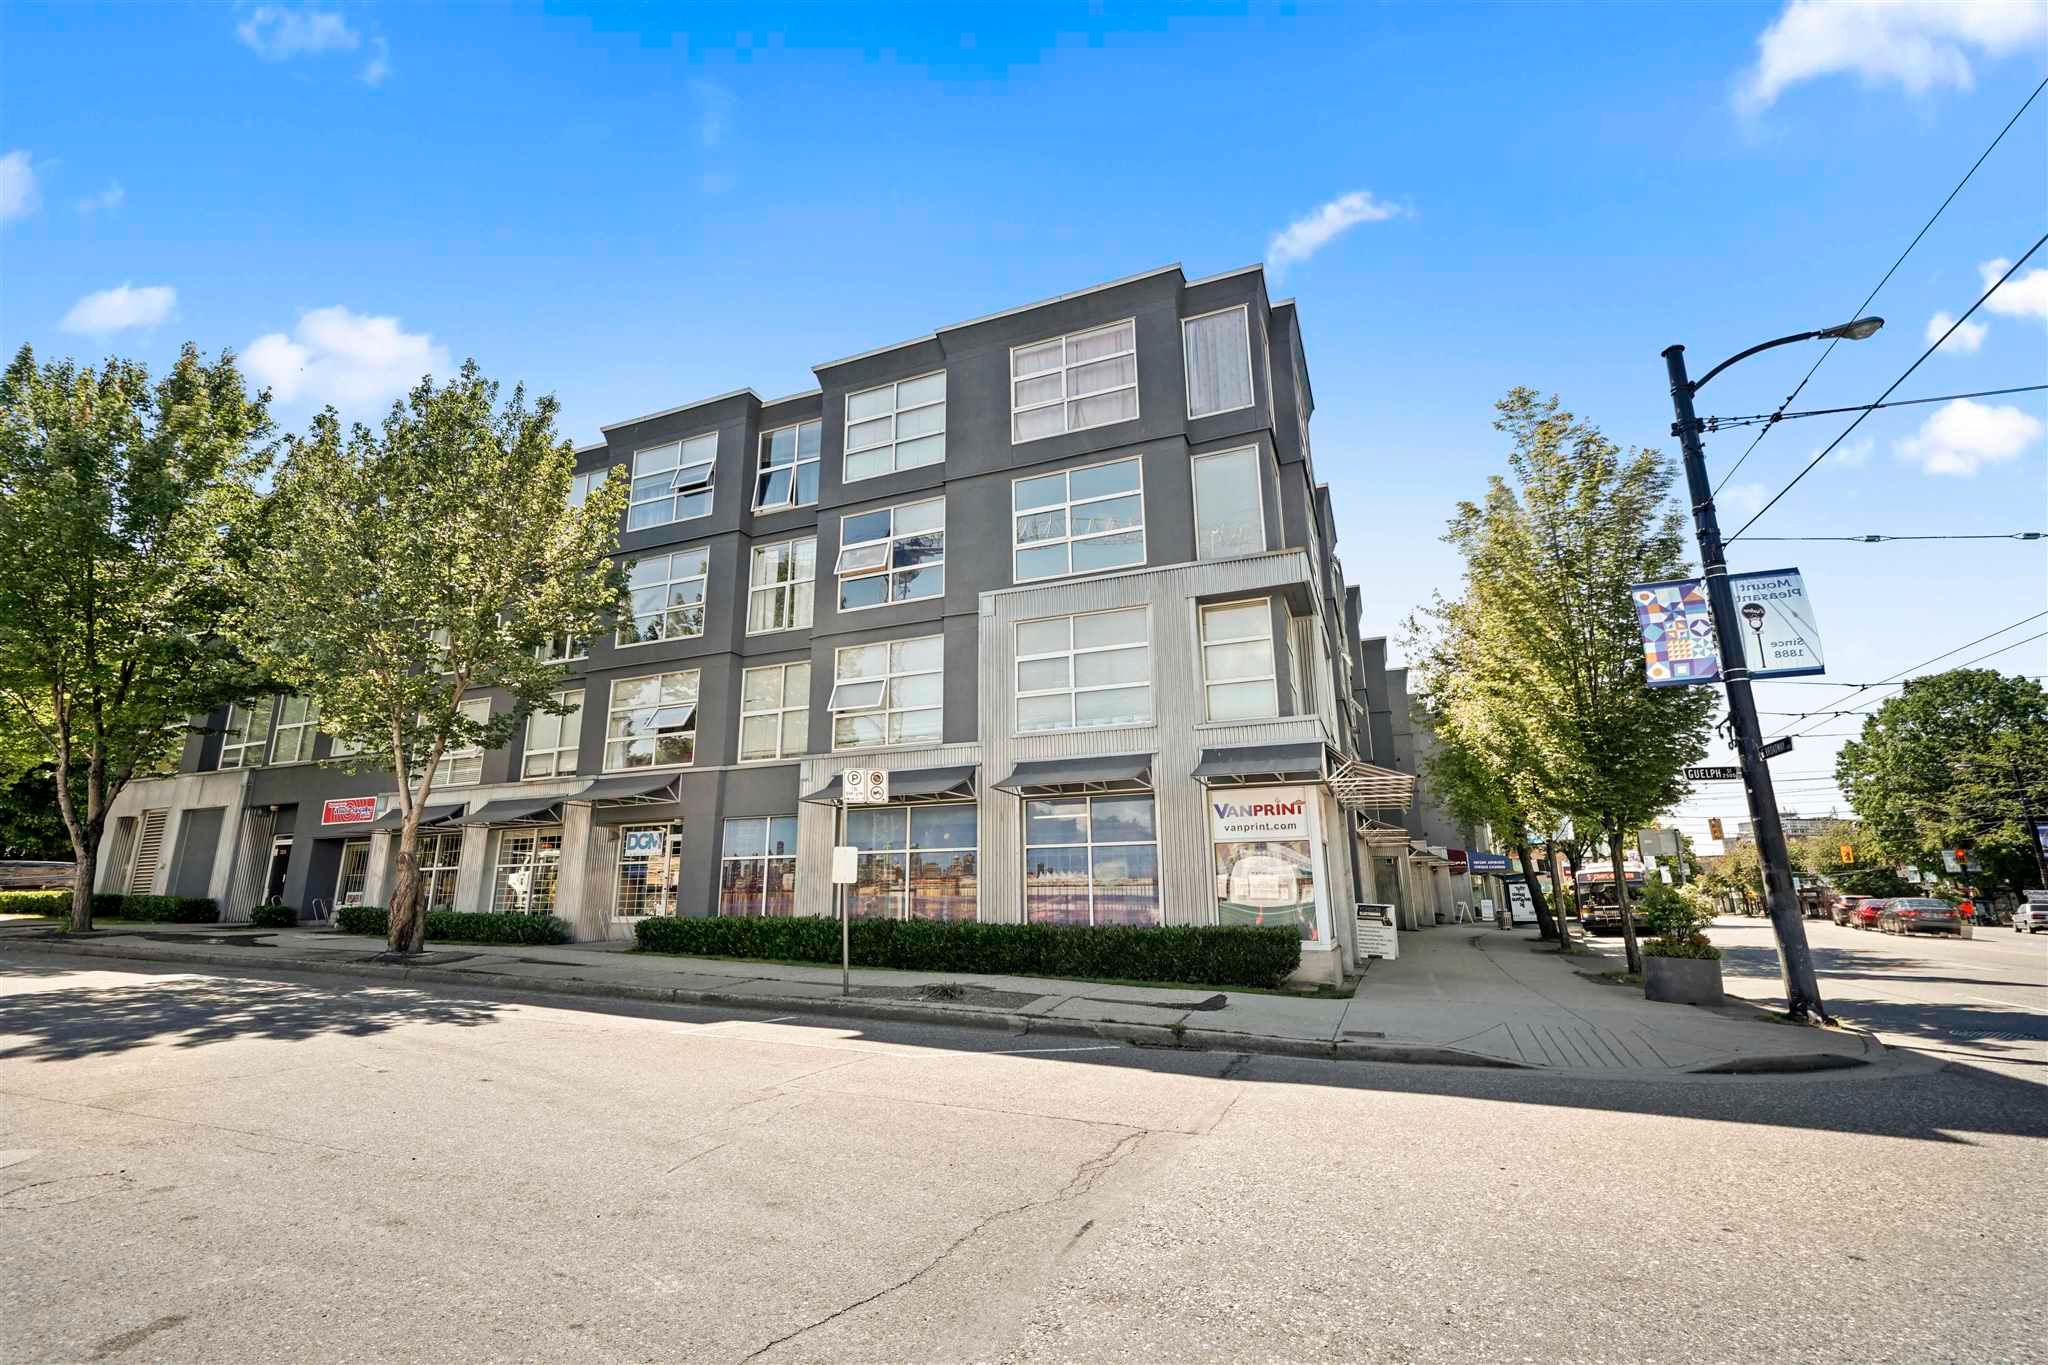 Main Photo: 320 418 E BROADWAY in Vancouver: Mount Pleasant VE Condo for sale (Vancouver East)  : MLS®# R2594278